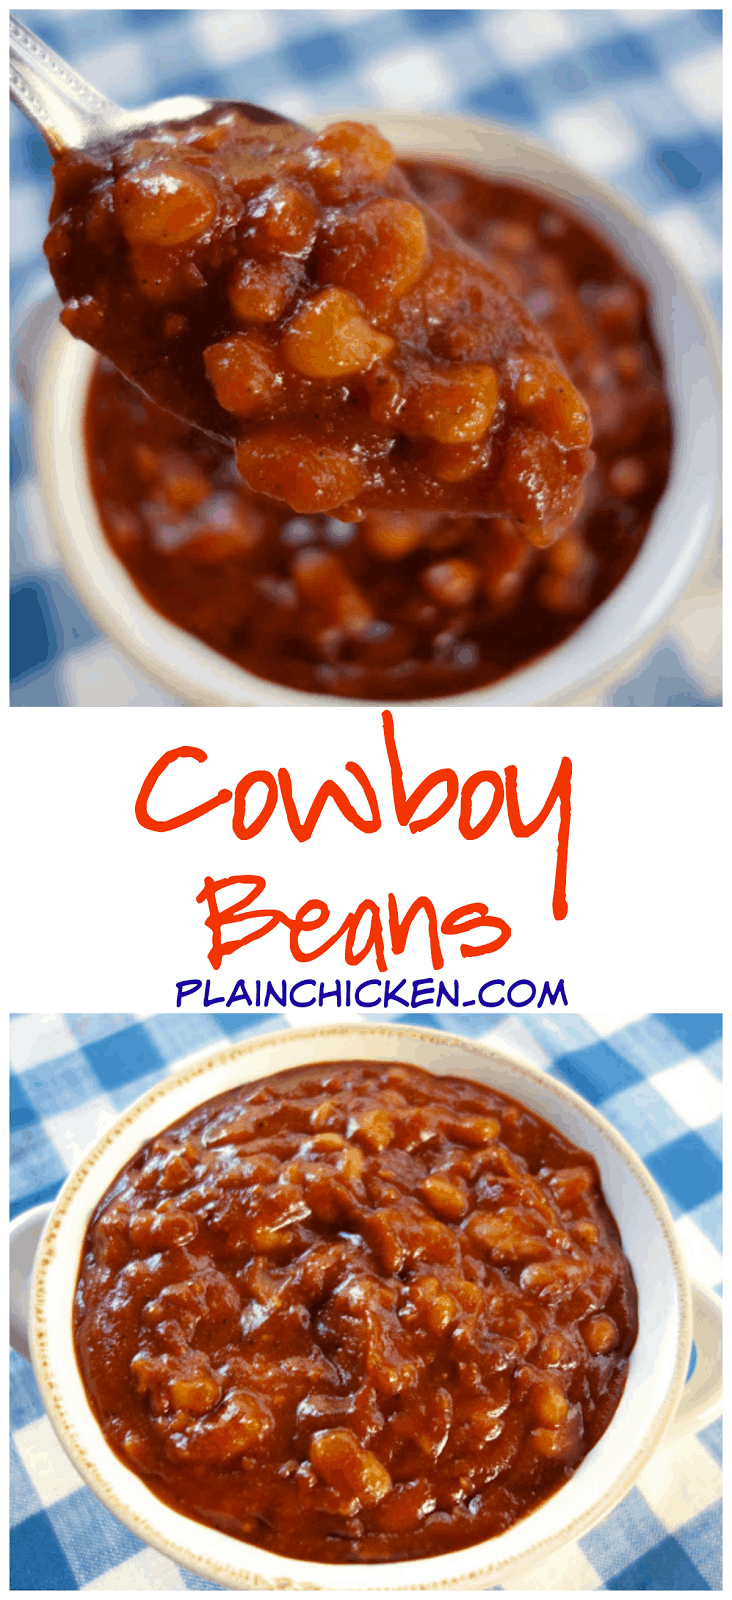 Cowboy Beans Recipe - white beans, bacon, onion, BBQ sauce, ketchup, honey, brown sugar, garlic, mustard, chili powder and vinegar - Bring to a boil and cook for 15 to 20 minutes! Quick homemade baked bean recipe. Great for a potluck!